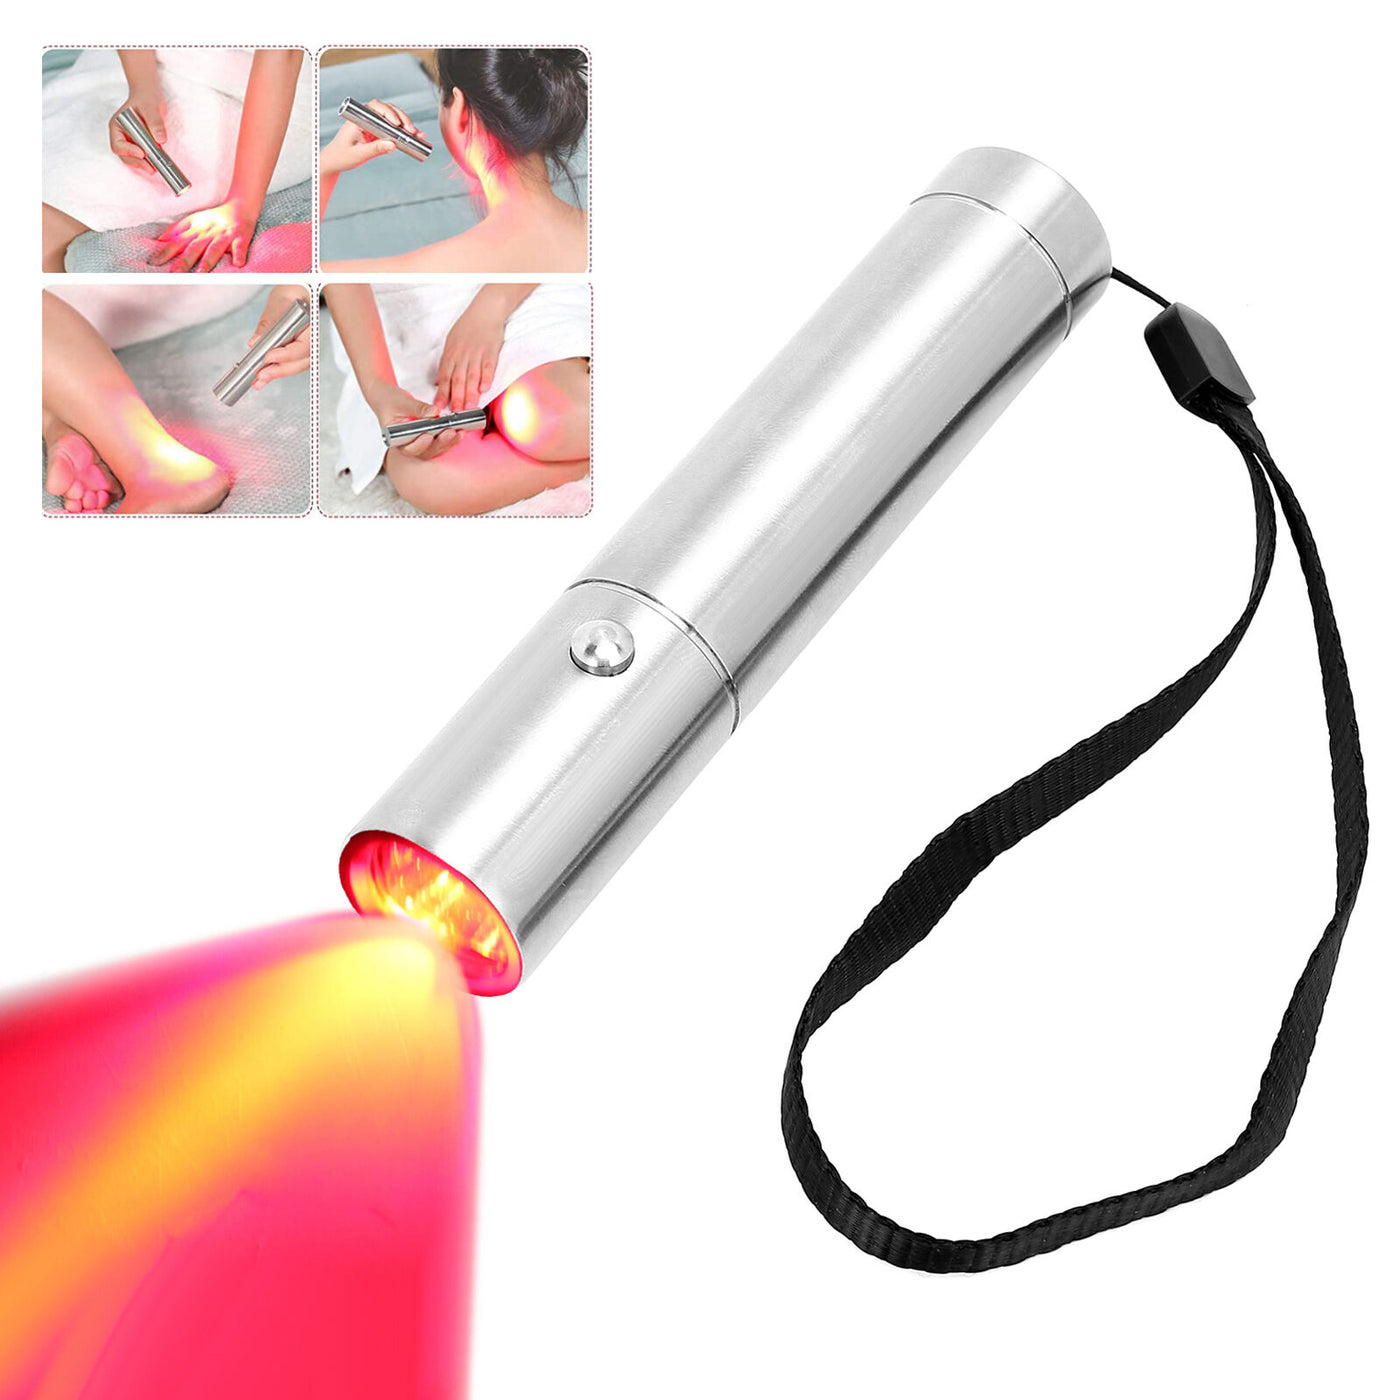 Light therapy device for pain relief  red light therapy at home